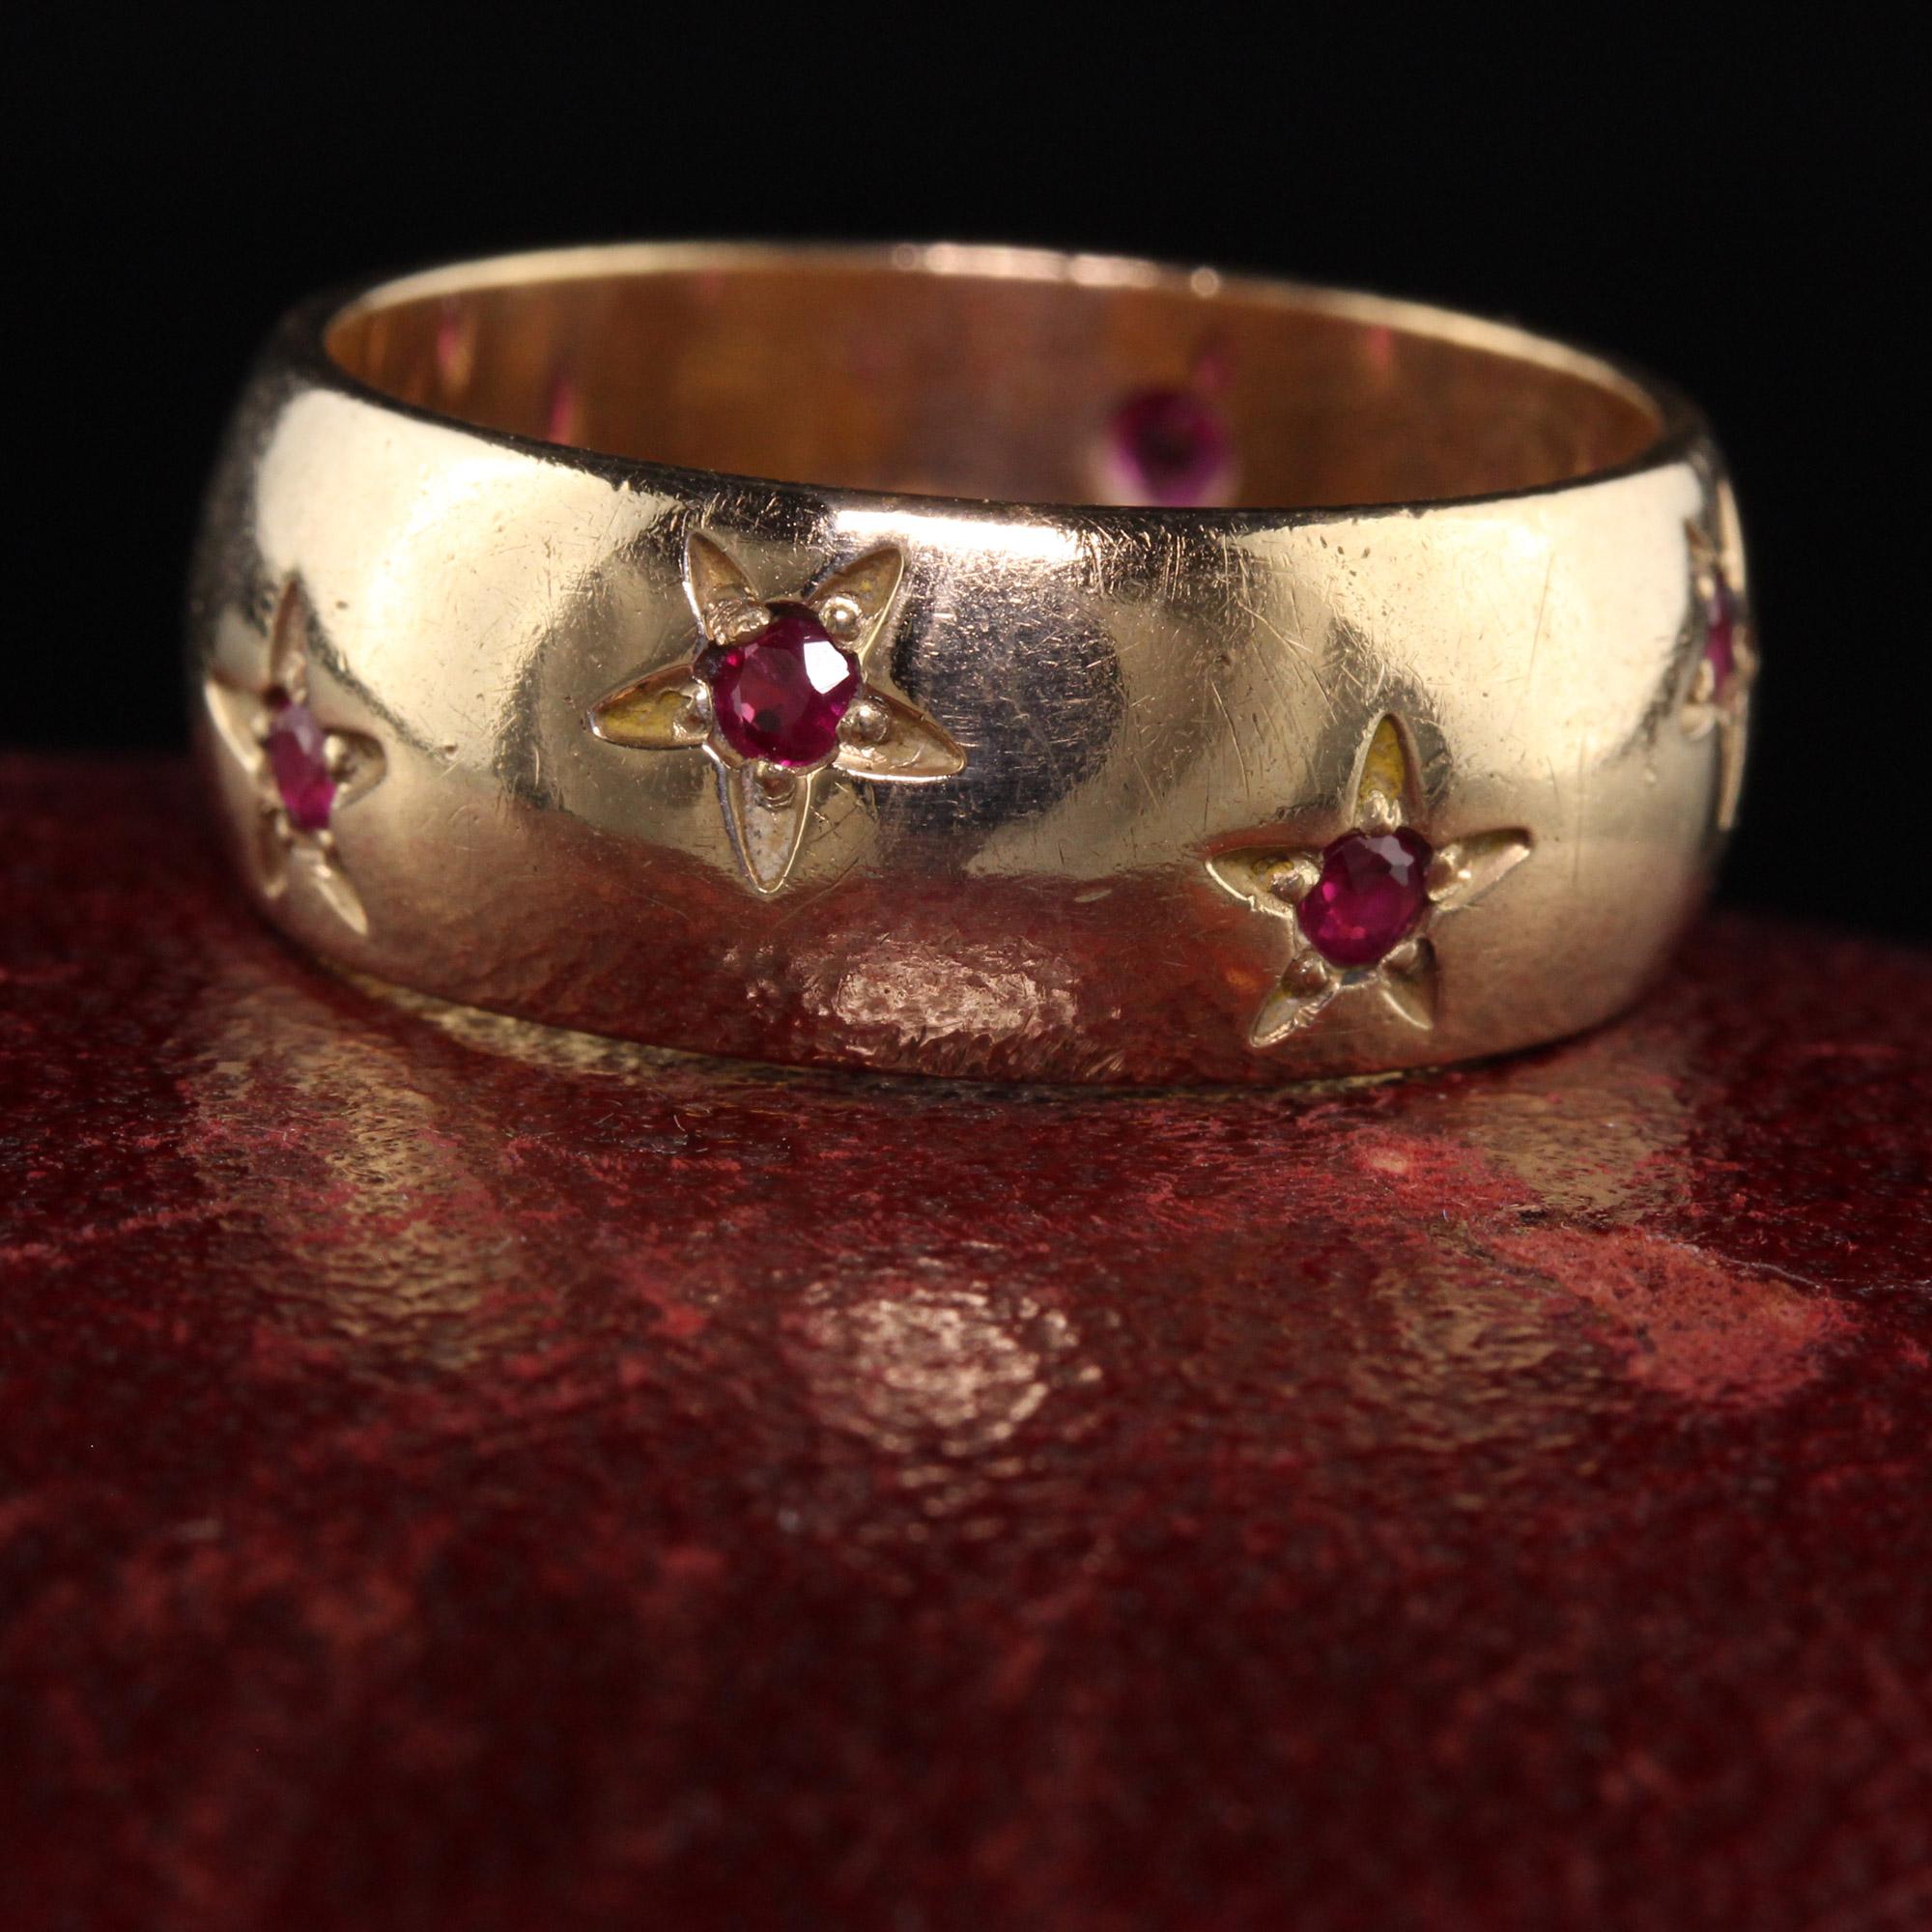 Beautiful Vintage Estate 14K Yellow Gold Ruby Star Pattern Wide Wedding Band. This beautiful wedding band is crafted in 14K yellow gold and has rubies set in a star pattern going around the entire ring. It is very unique!

Item #R1155

Metal: 14K